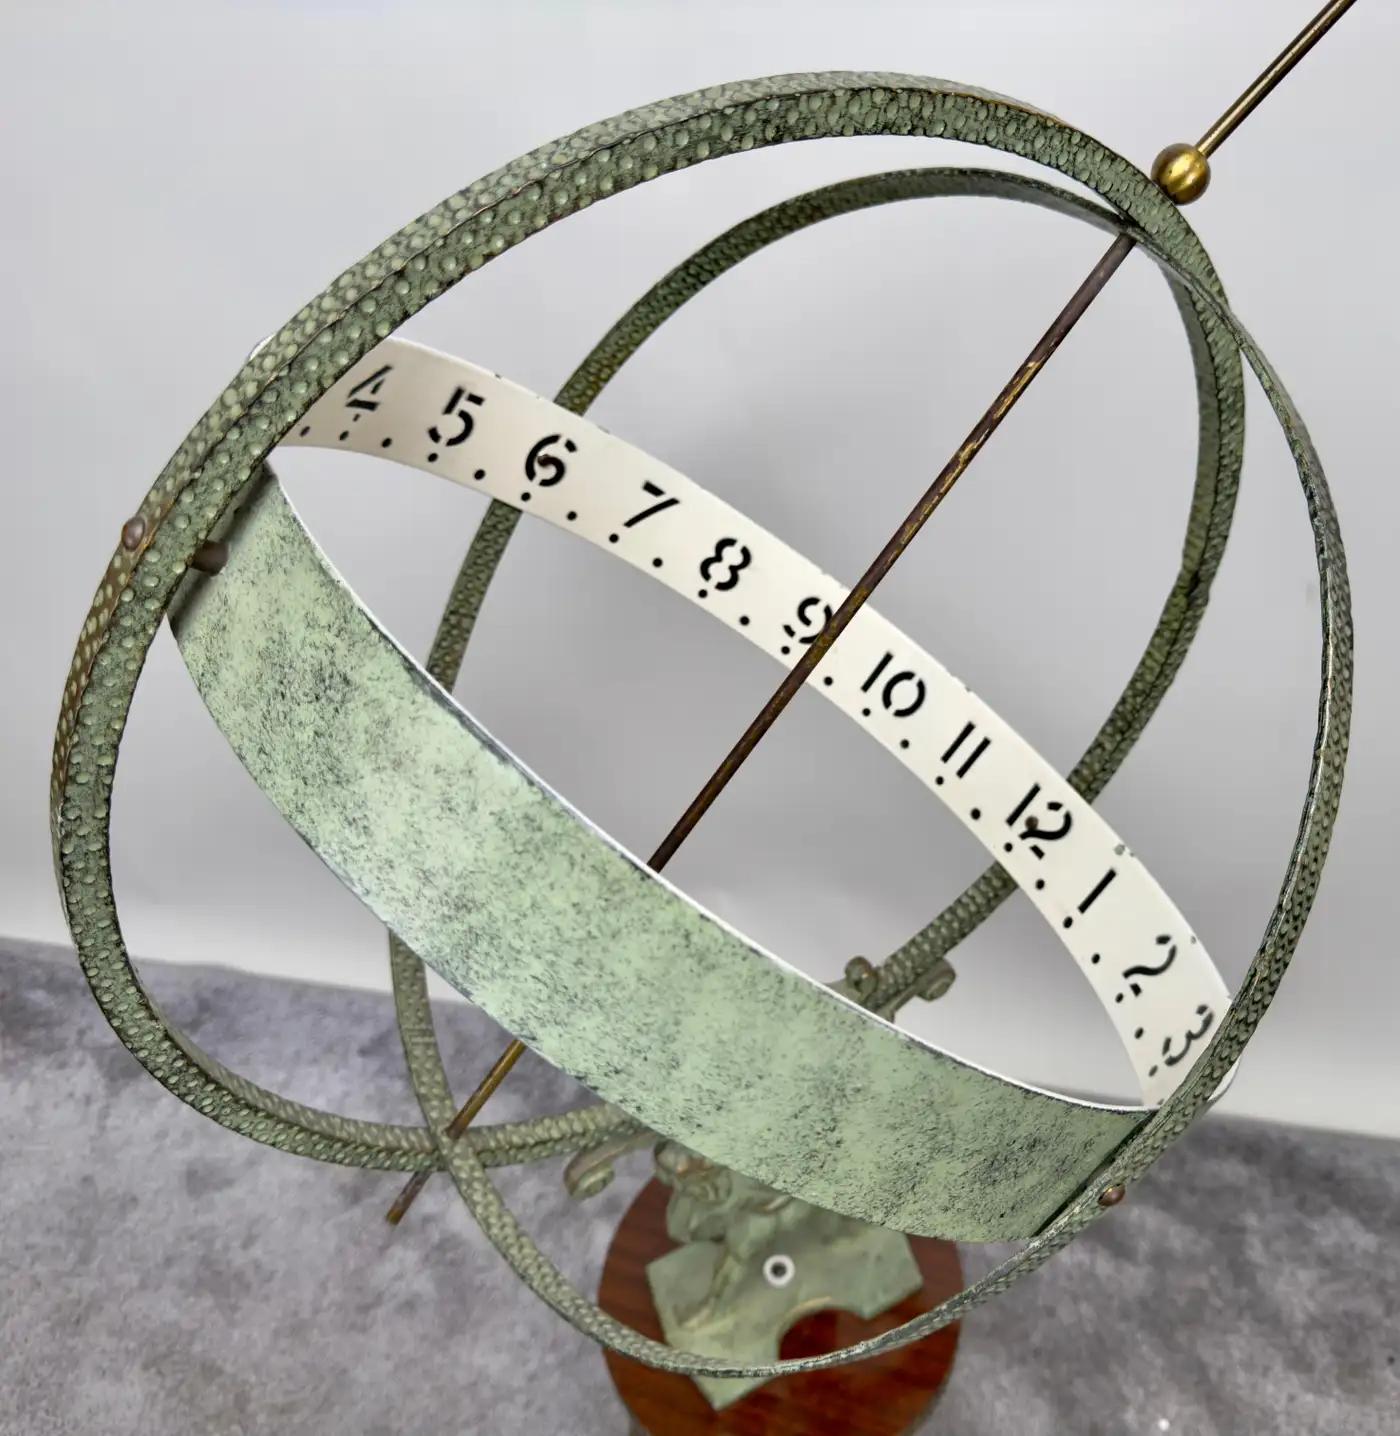 Vintage Swedish Sun Clock or Armillary Sun Dial Attributed to Sune Rooth For Sale 7